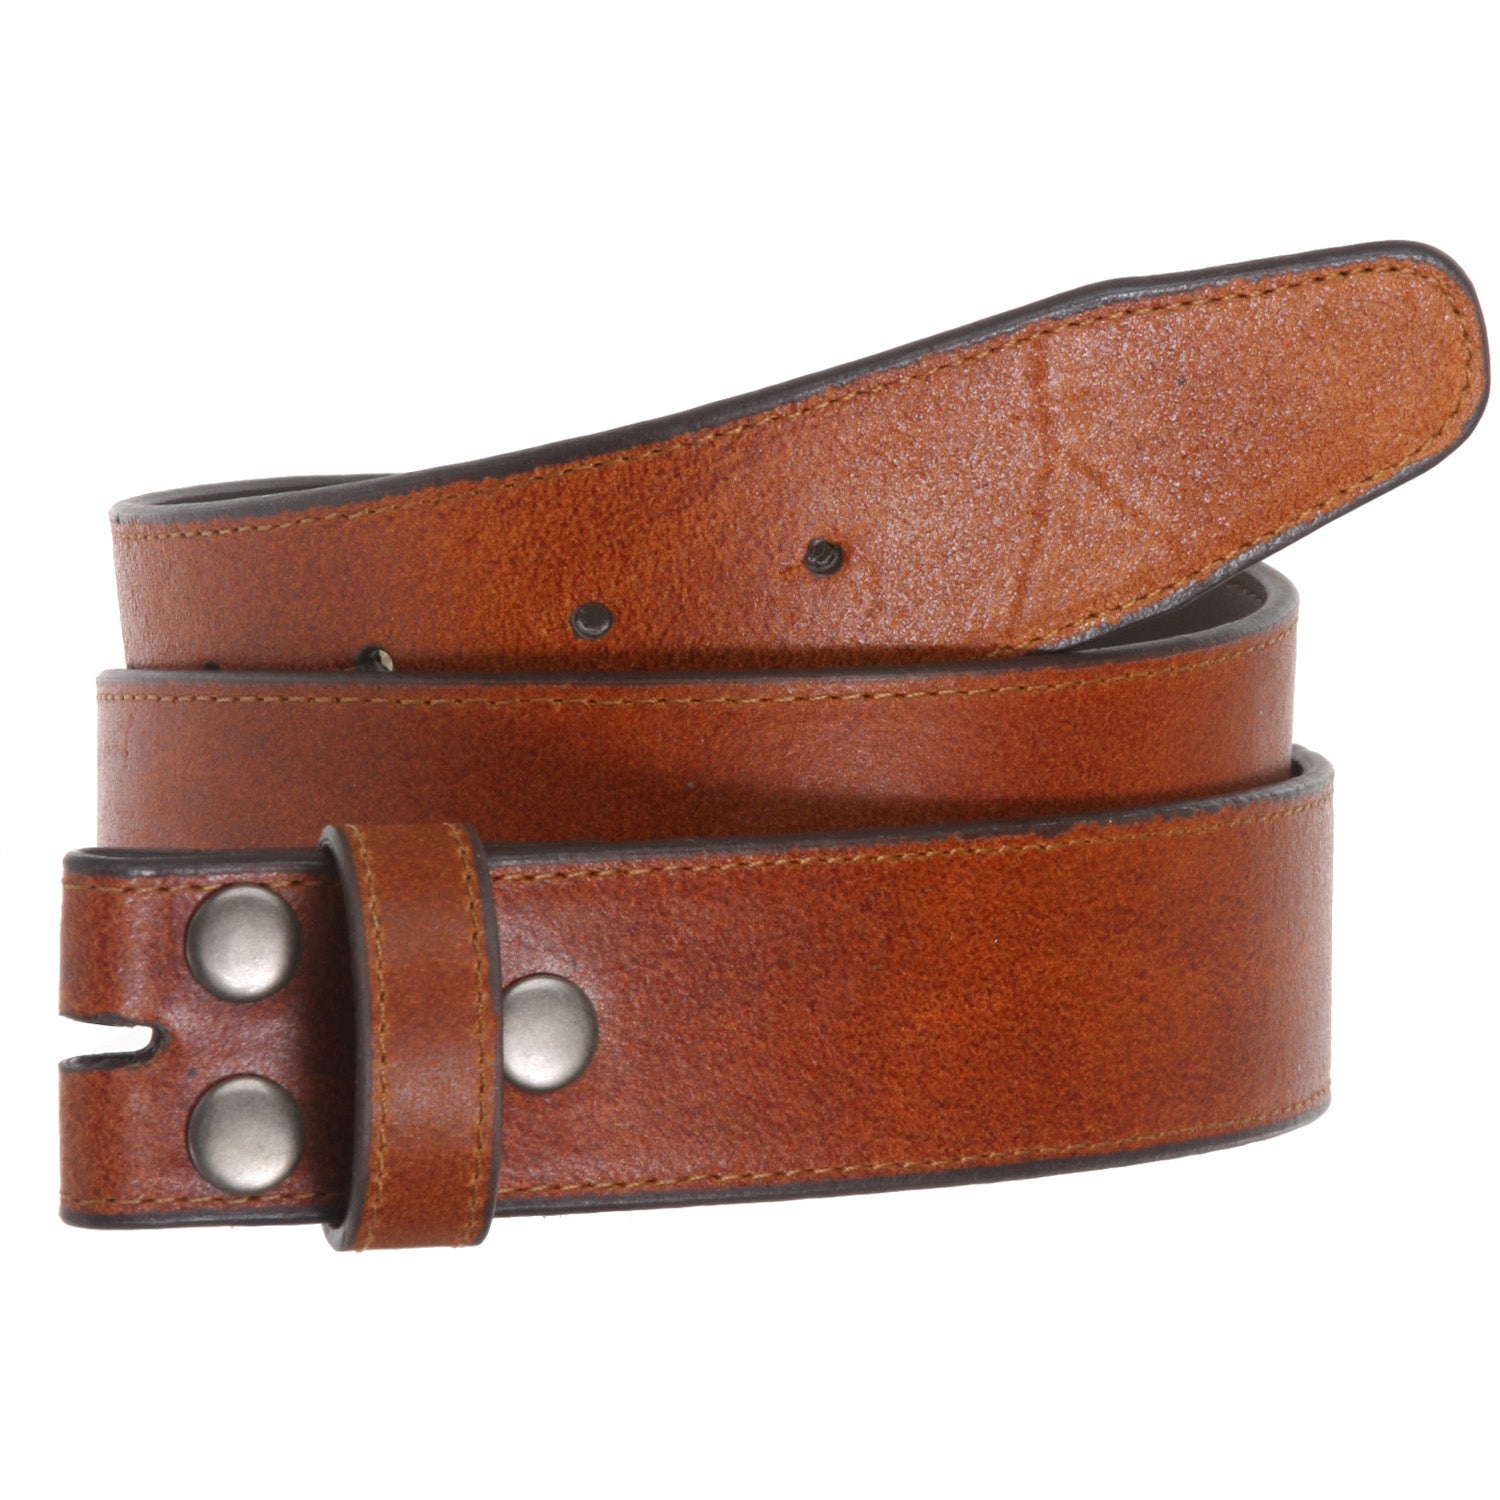 1 1/2" (40mm) Snap On Stitching-Edged Leather Belt Strap